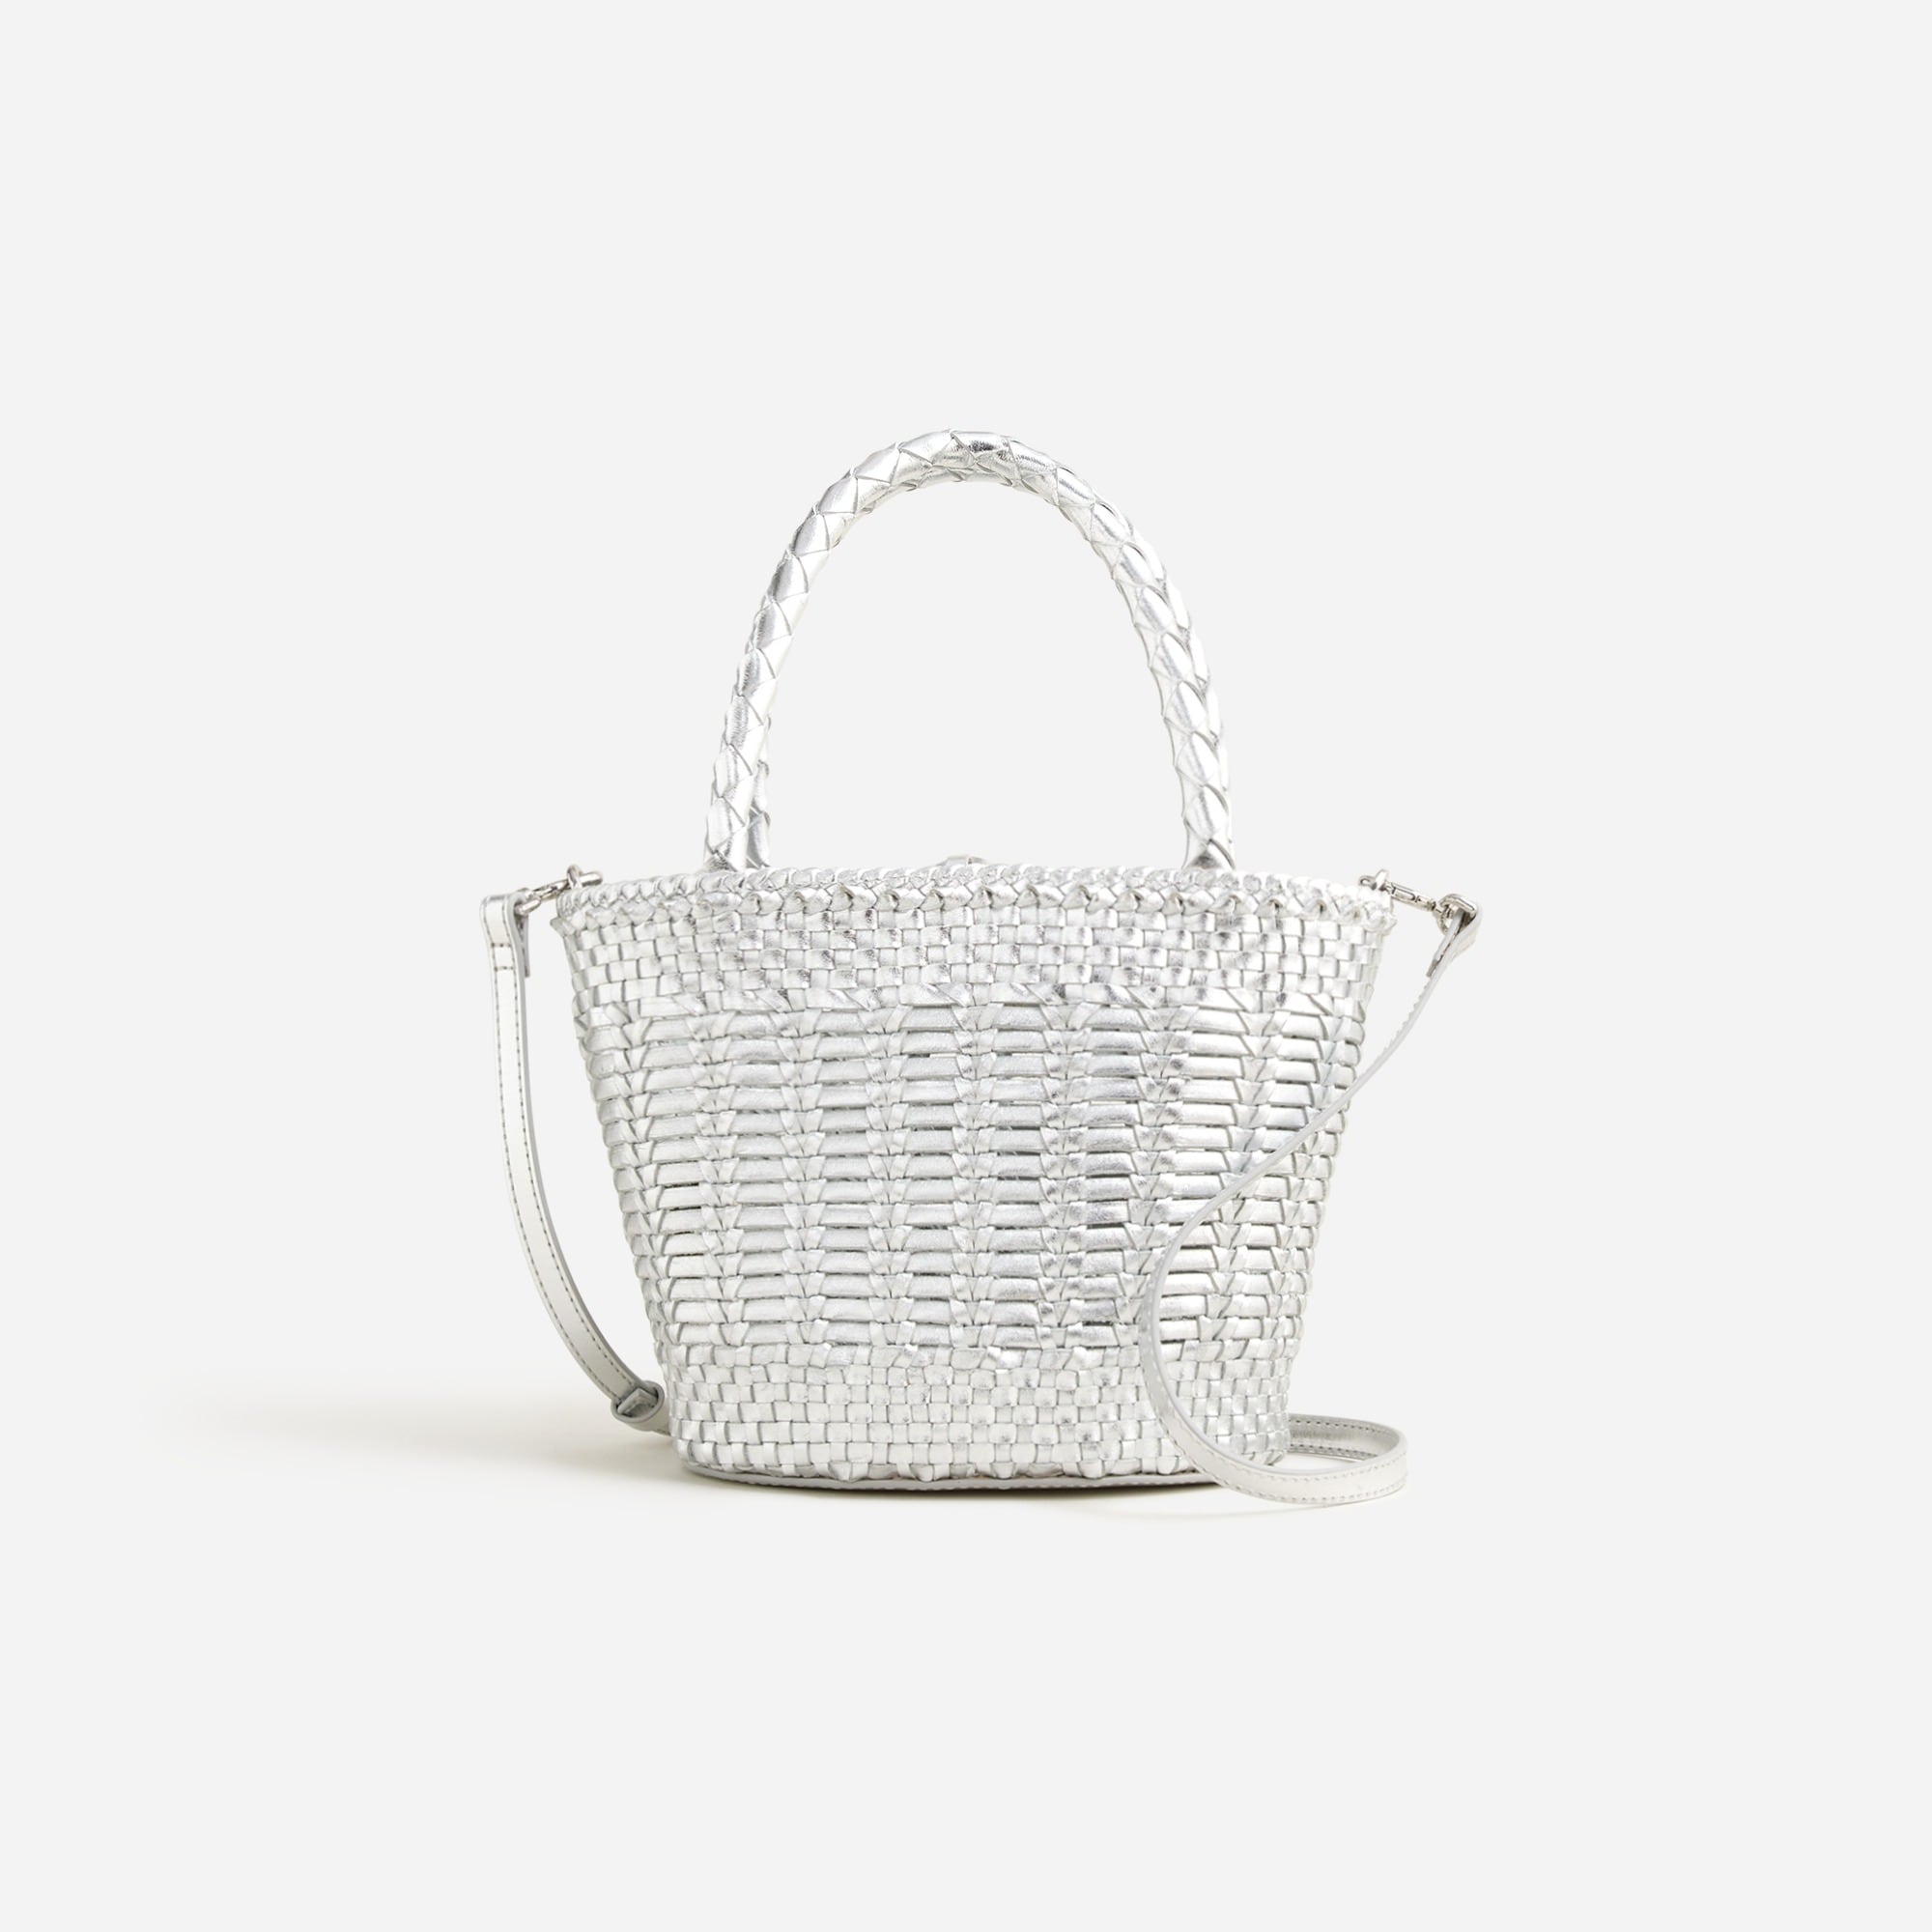  Small open-weave bag in leather